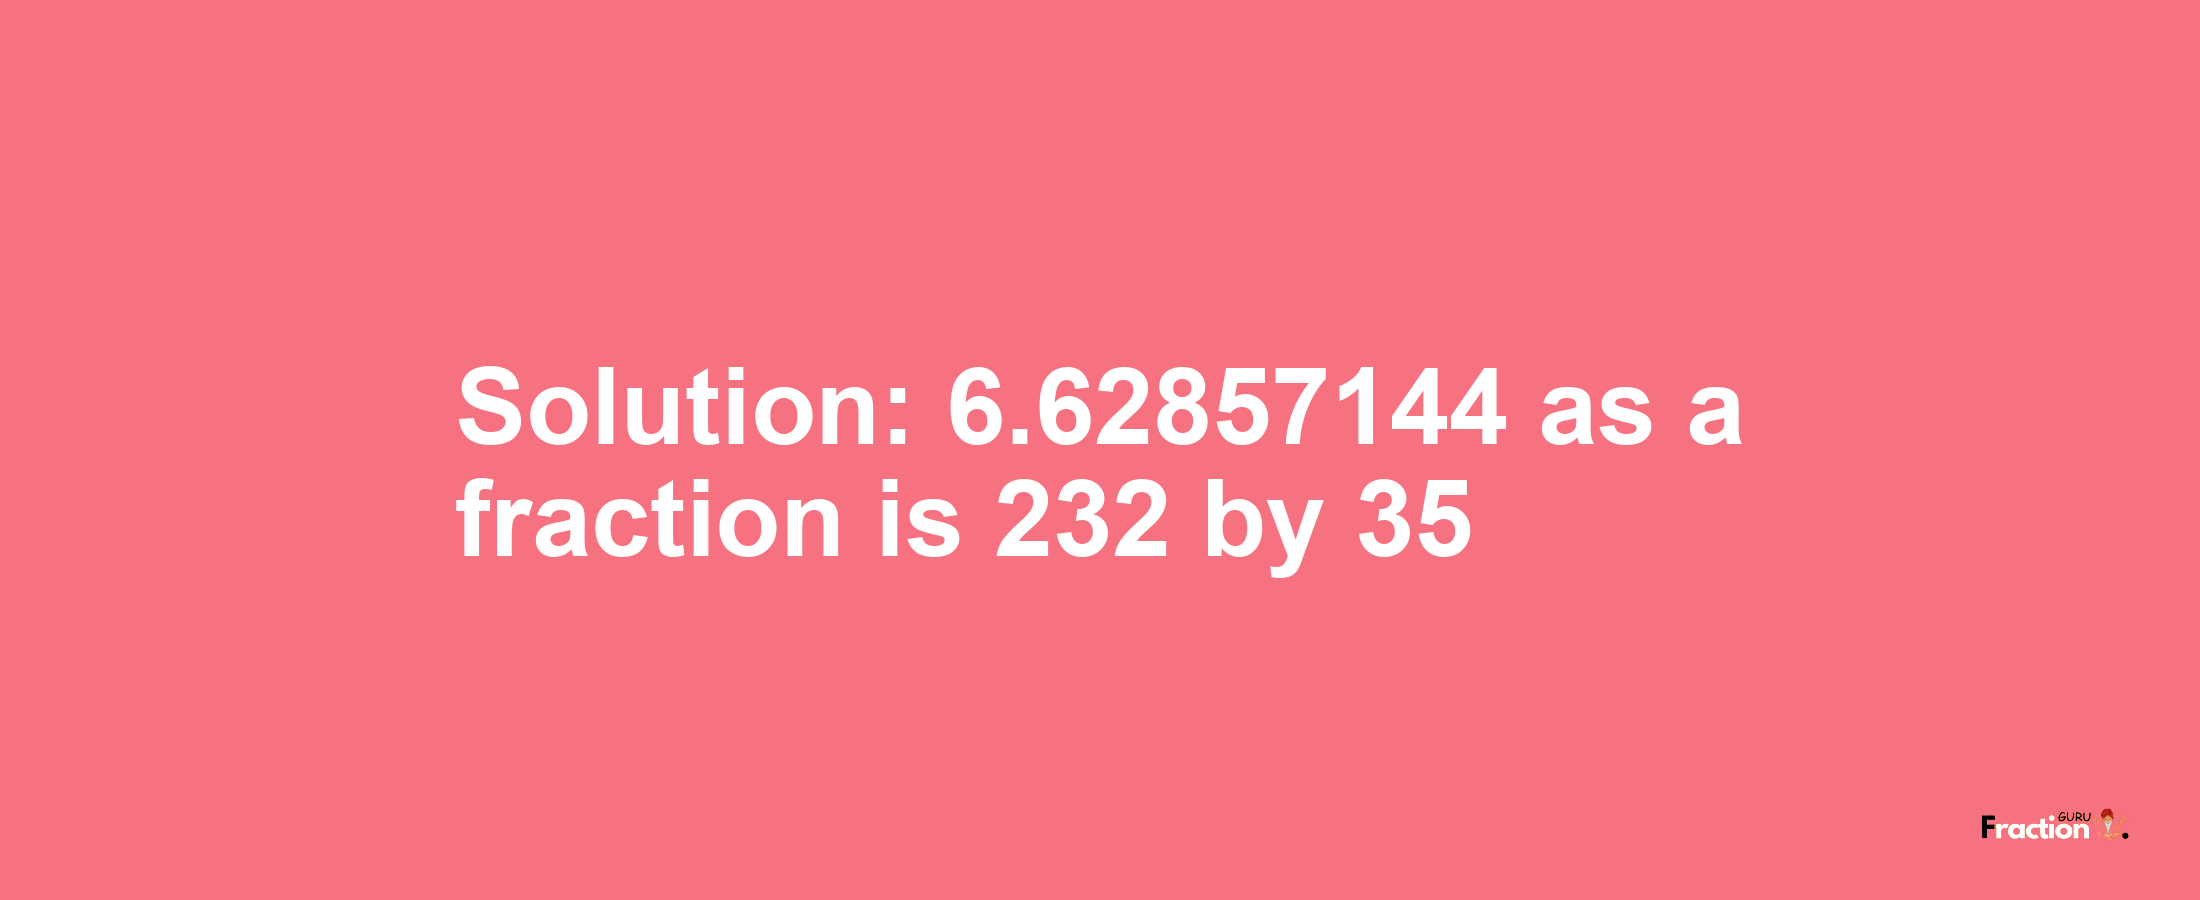 Solution:6.62857144 as a fraction is 232/35